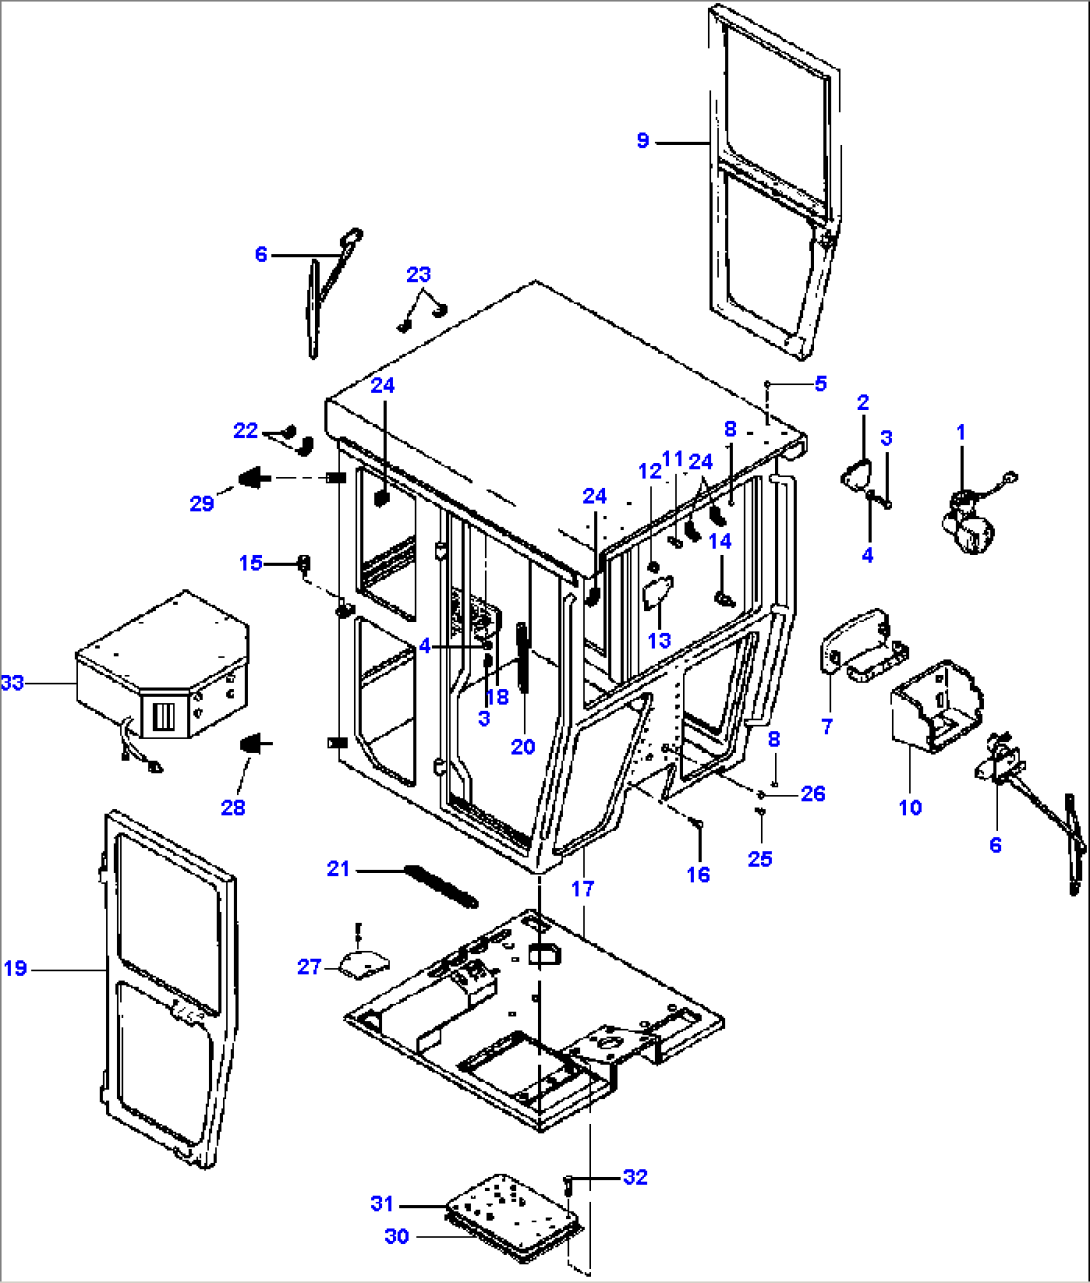 FIG. K5180-01A4 CAB ASSEMBLY - FULL HEIGHT - S/N 202844 AND UP